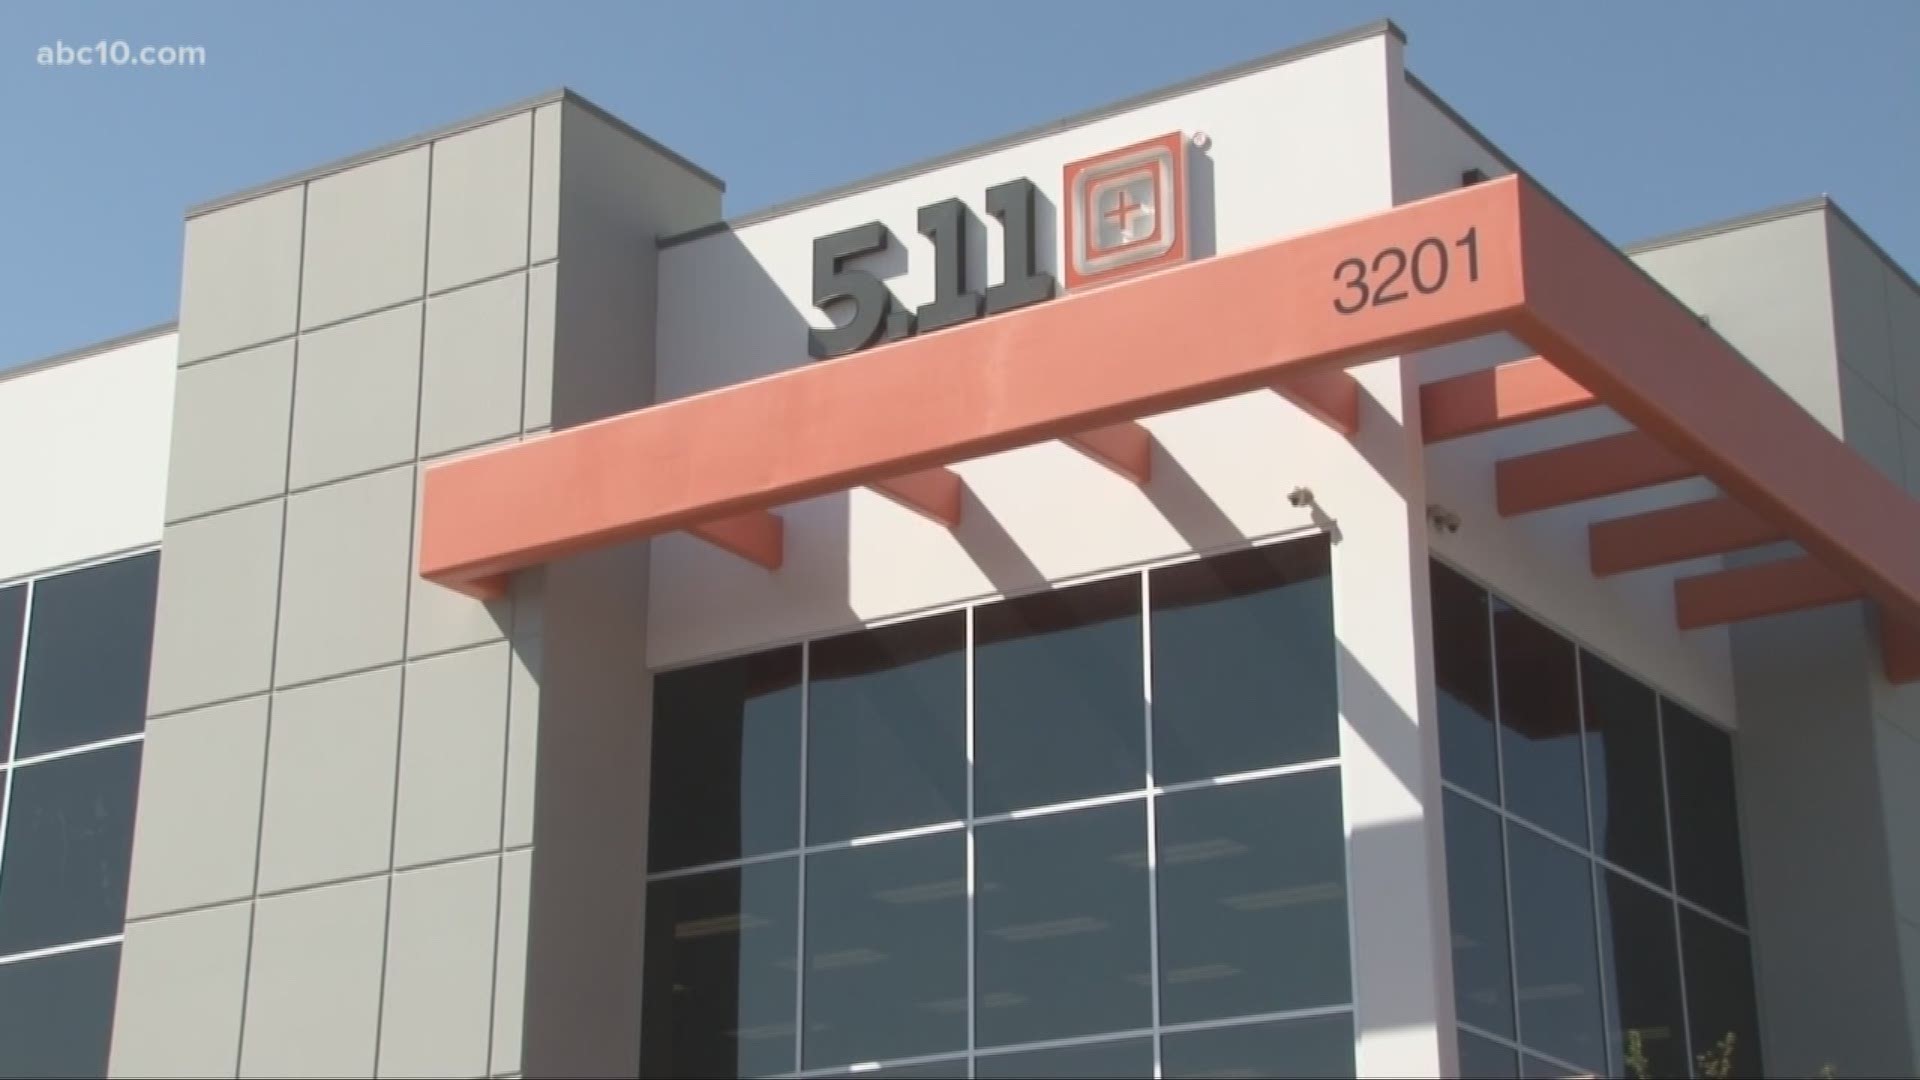 Friday marked a historic day for 5.11 Tactical, a company founded with just a single pair of pants out of Modesto. They opened their 40th store in the country and launched their global distribution center in the heart of Manteca.